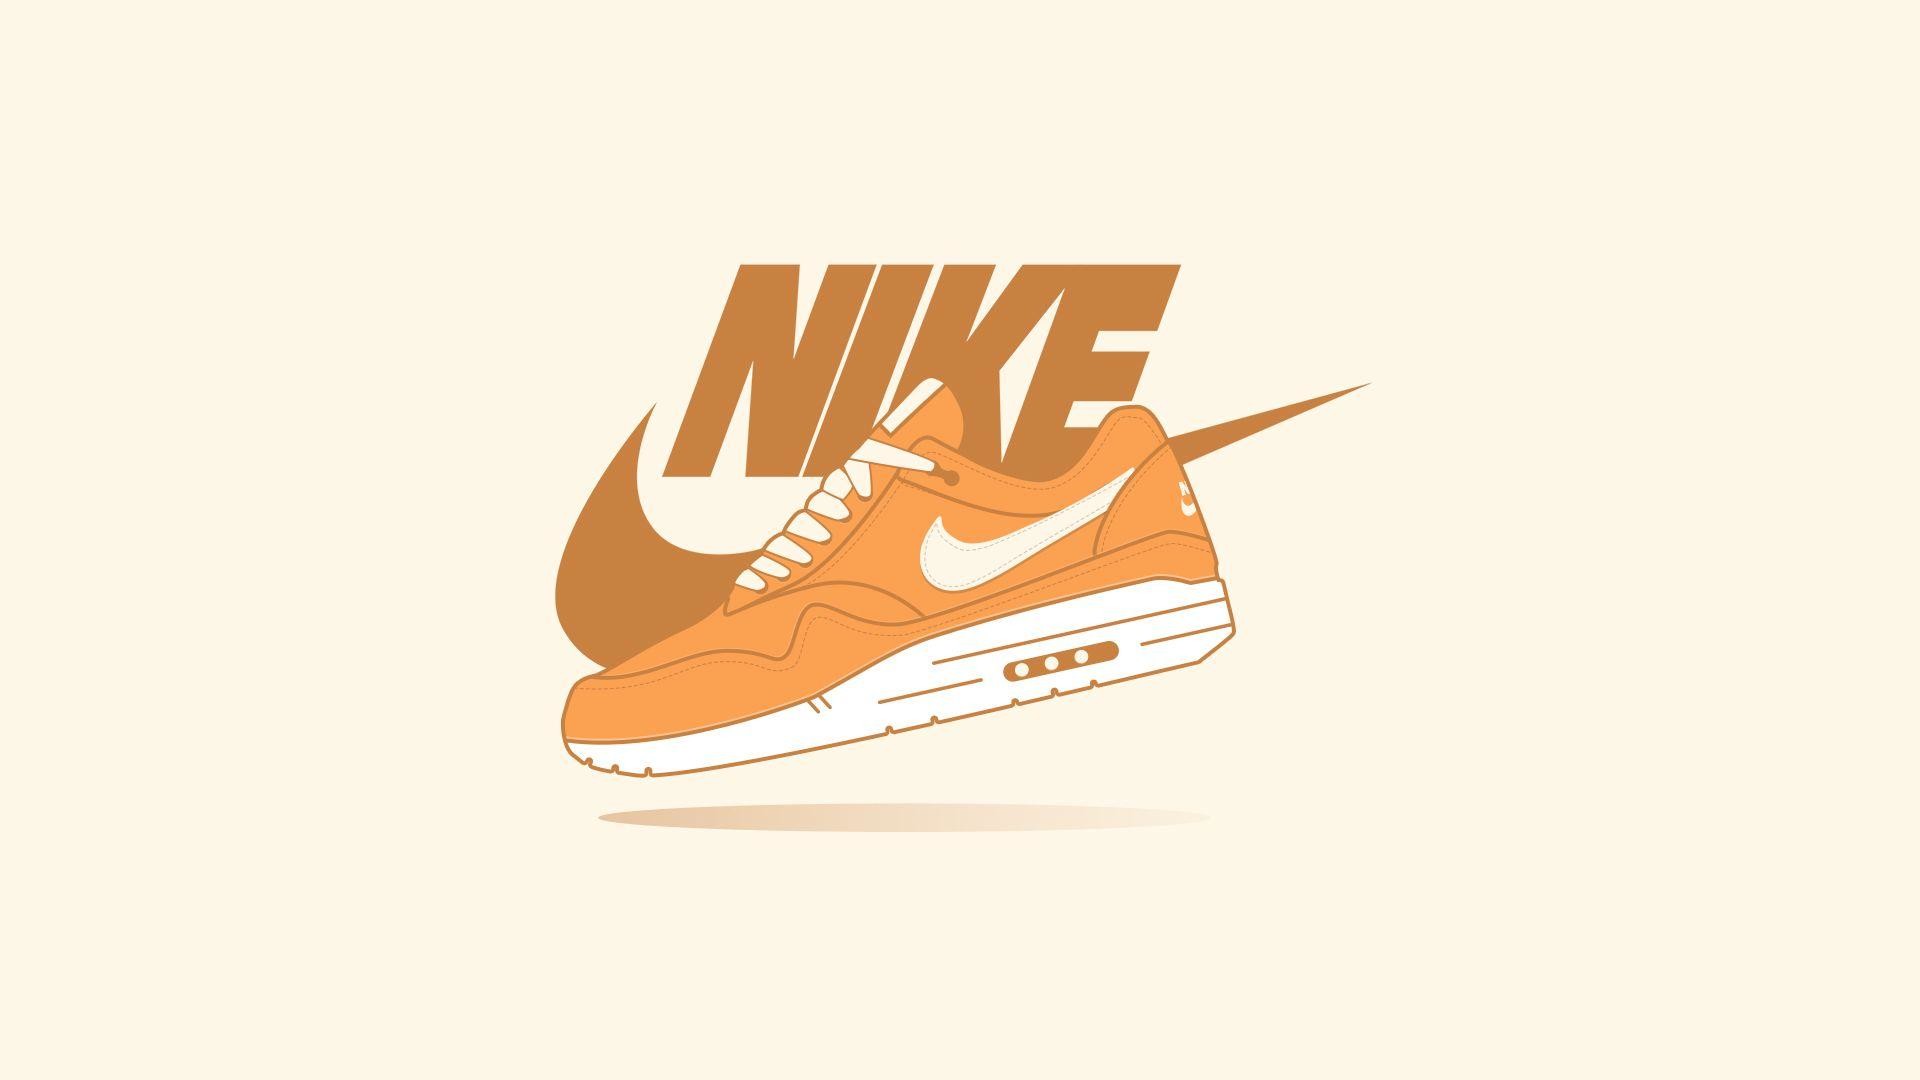 Nike Air Max Wallpaper (57+ pictures)